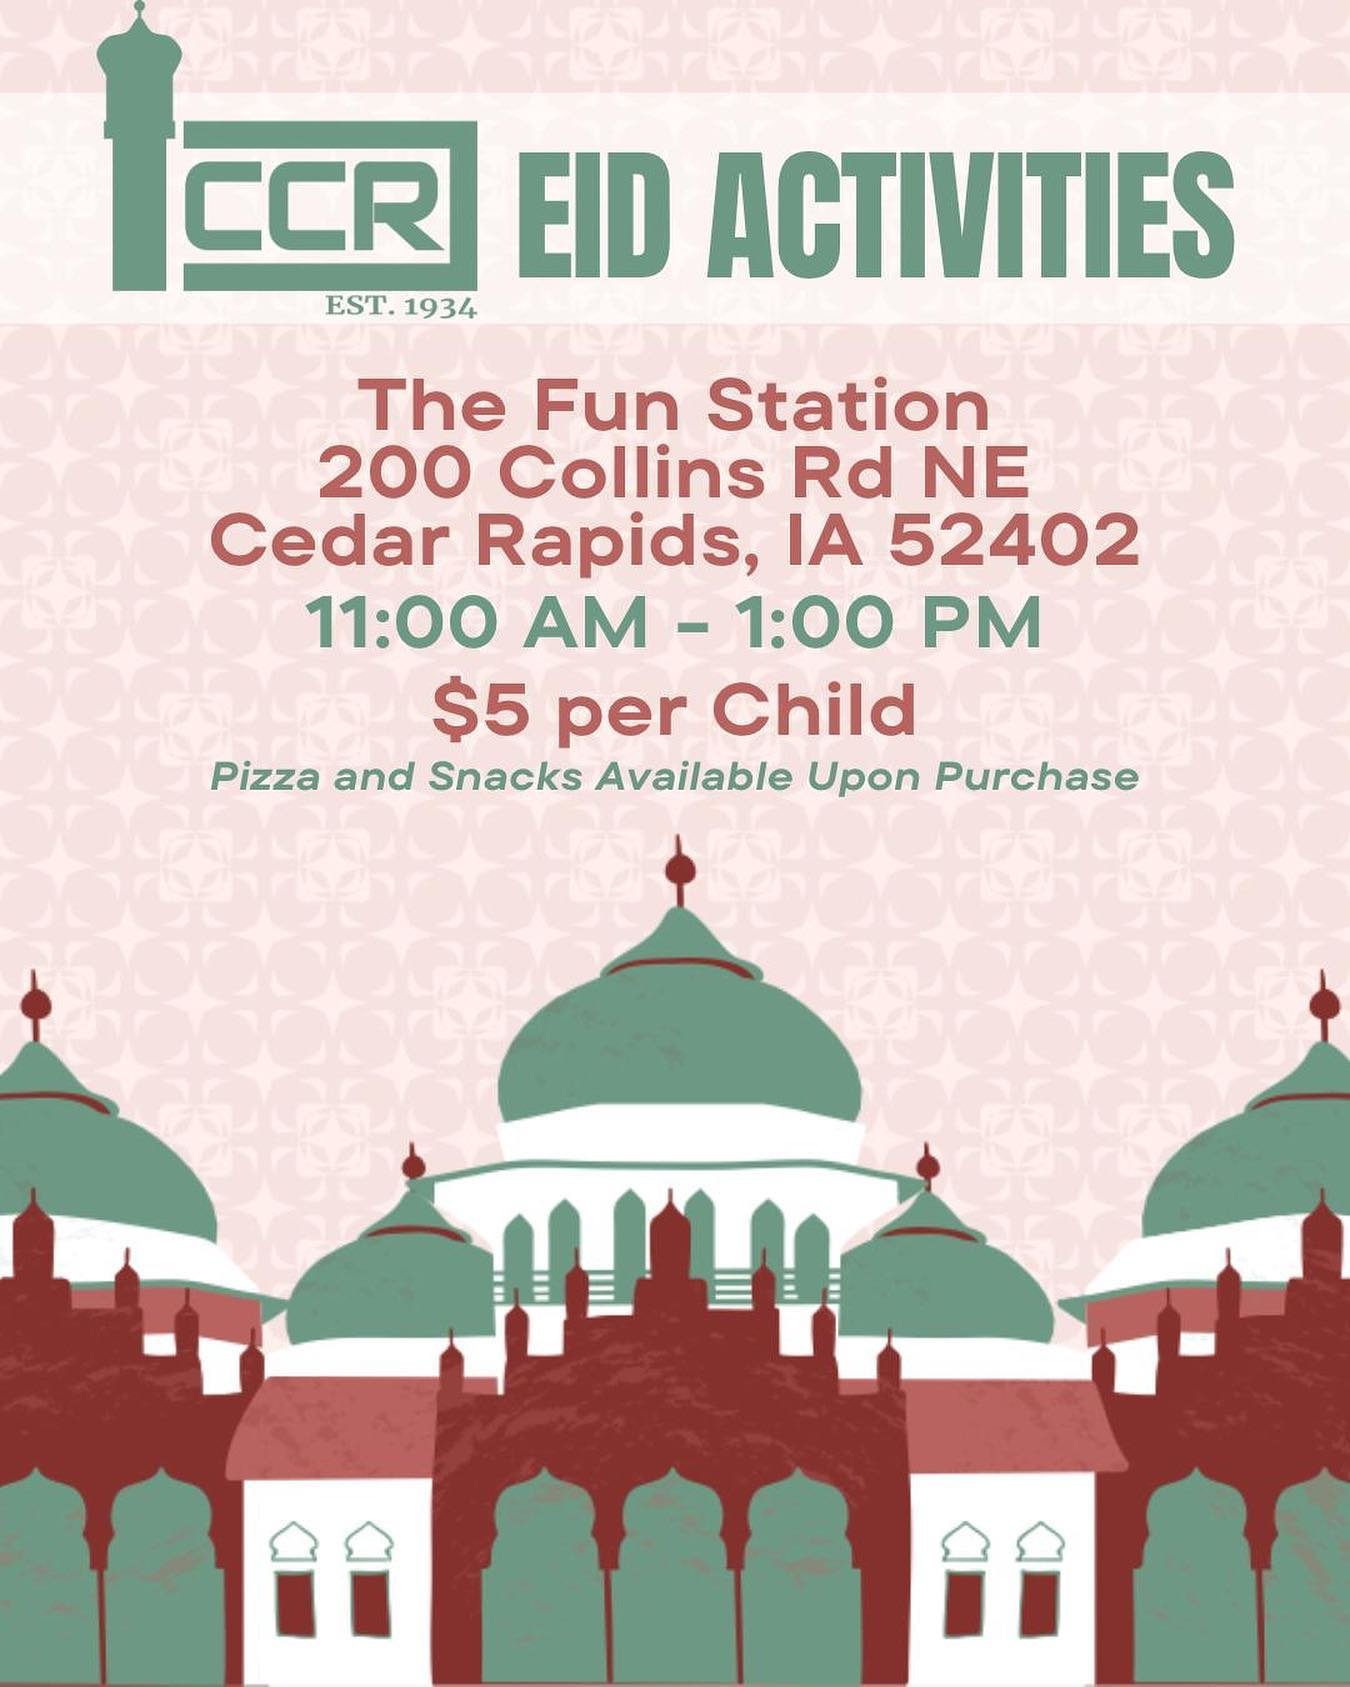 Eid joy is in the air! Gather your little ones for a day filled with fun and treats at The Fun Station this Wednesday, April 10th from 11 AM to 1 PM. ☀️ 🎈 

Let&rsquo;s make this Eid unforgettable! #EidCelebration #eidulfitr🎉